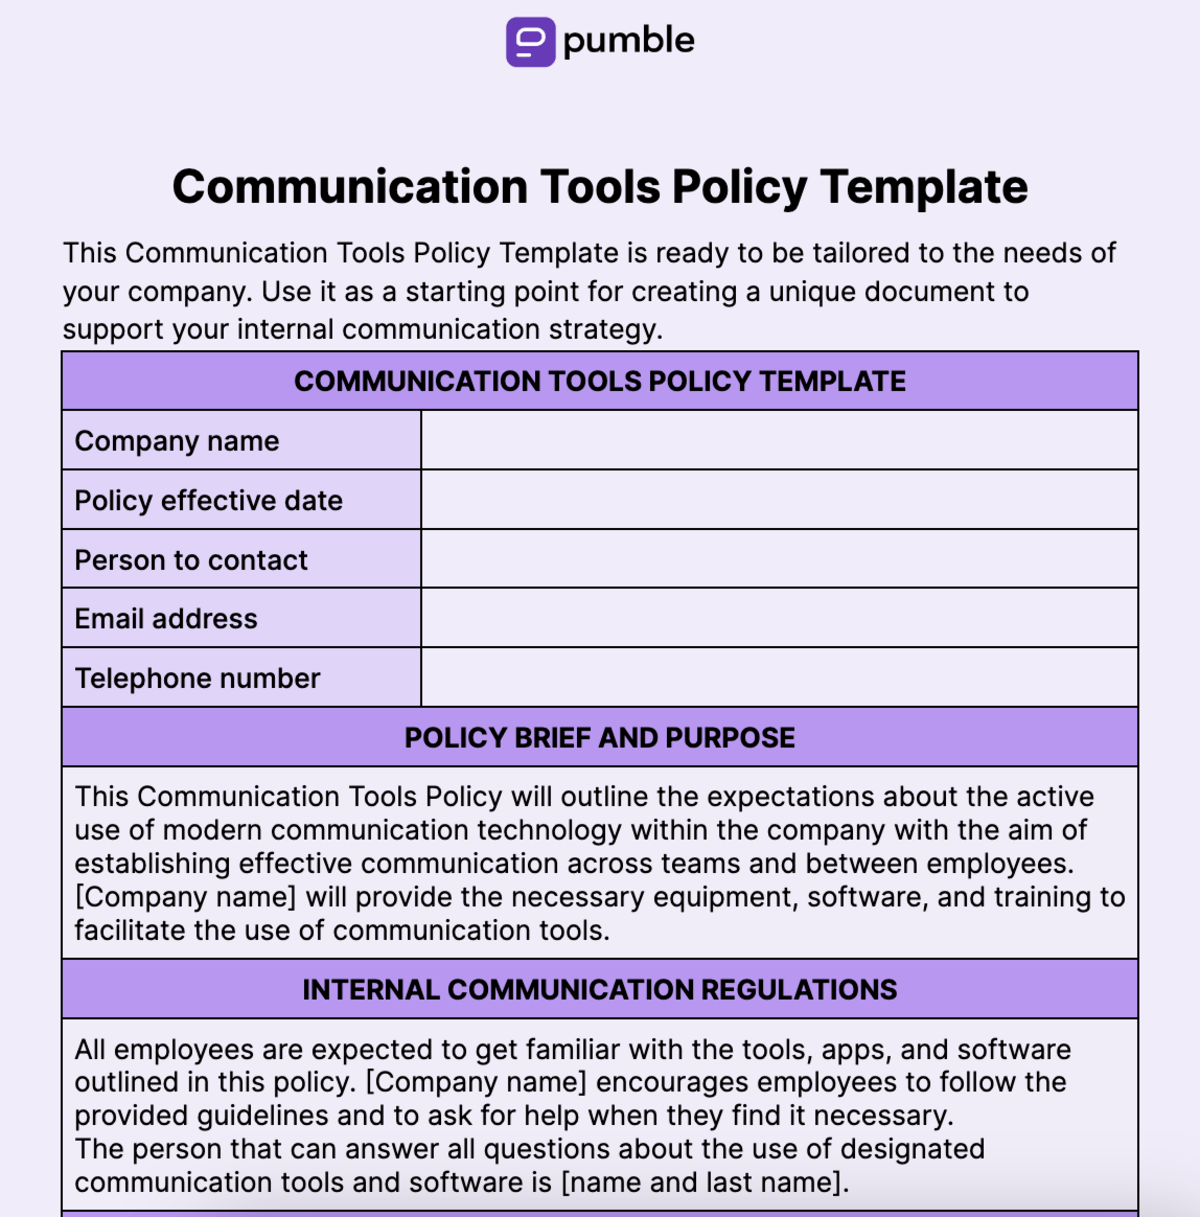 Communication Tools Policy Template